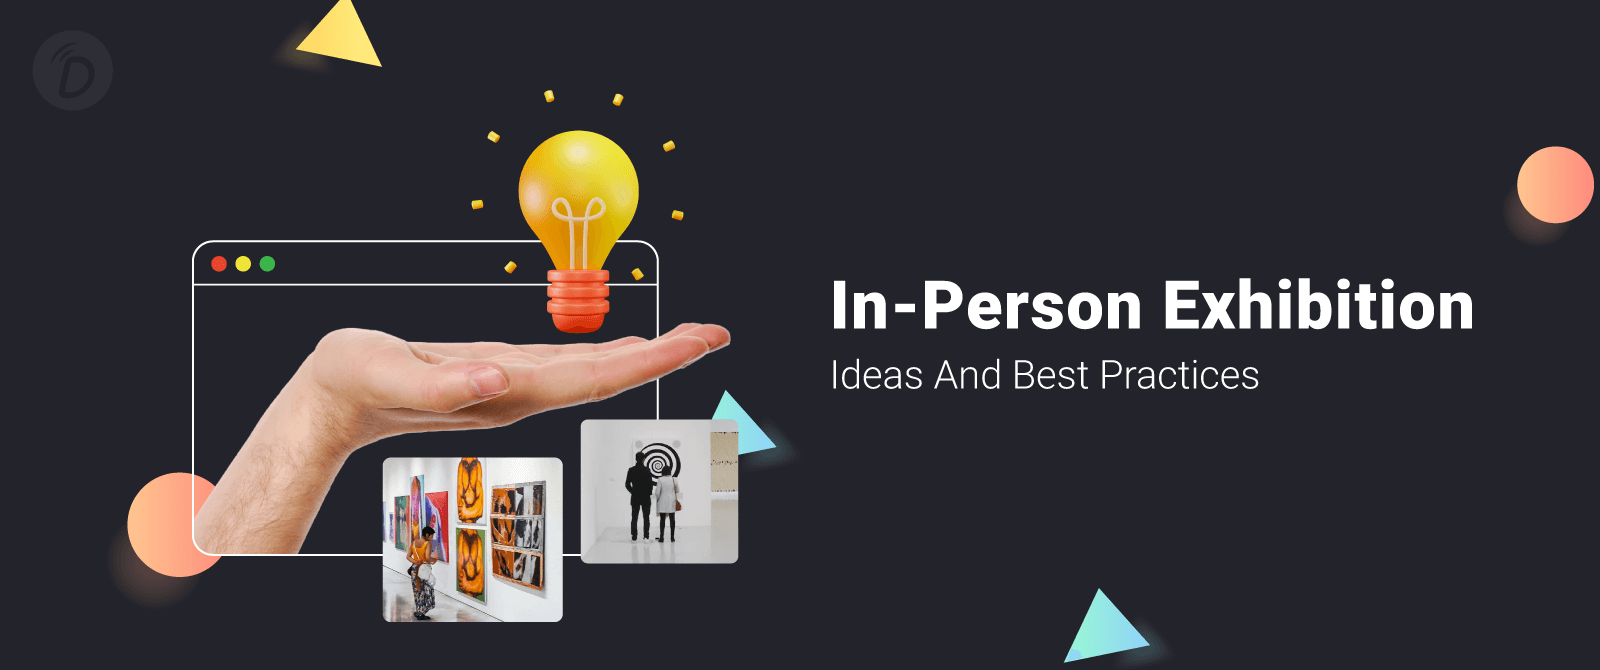 In-Person Exhibition Ideas And Best Practices